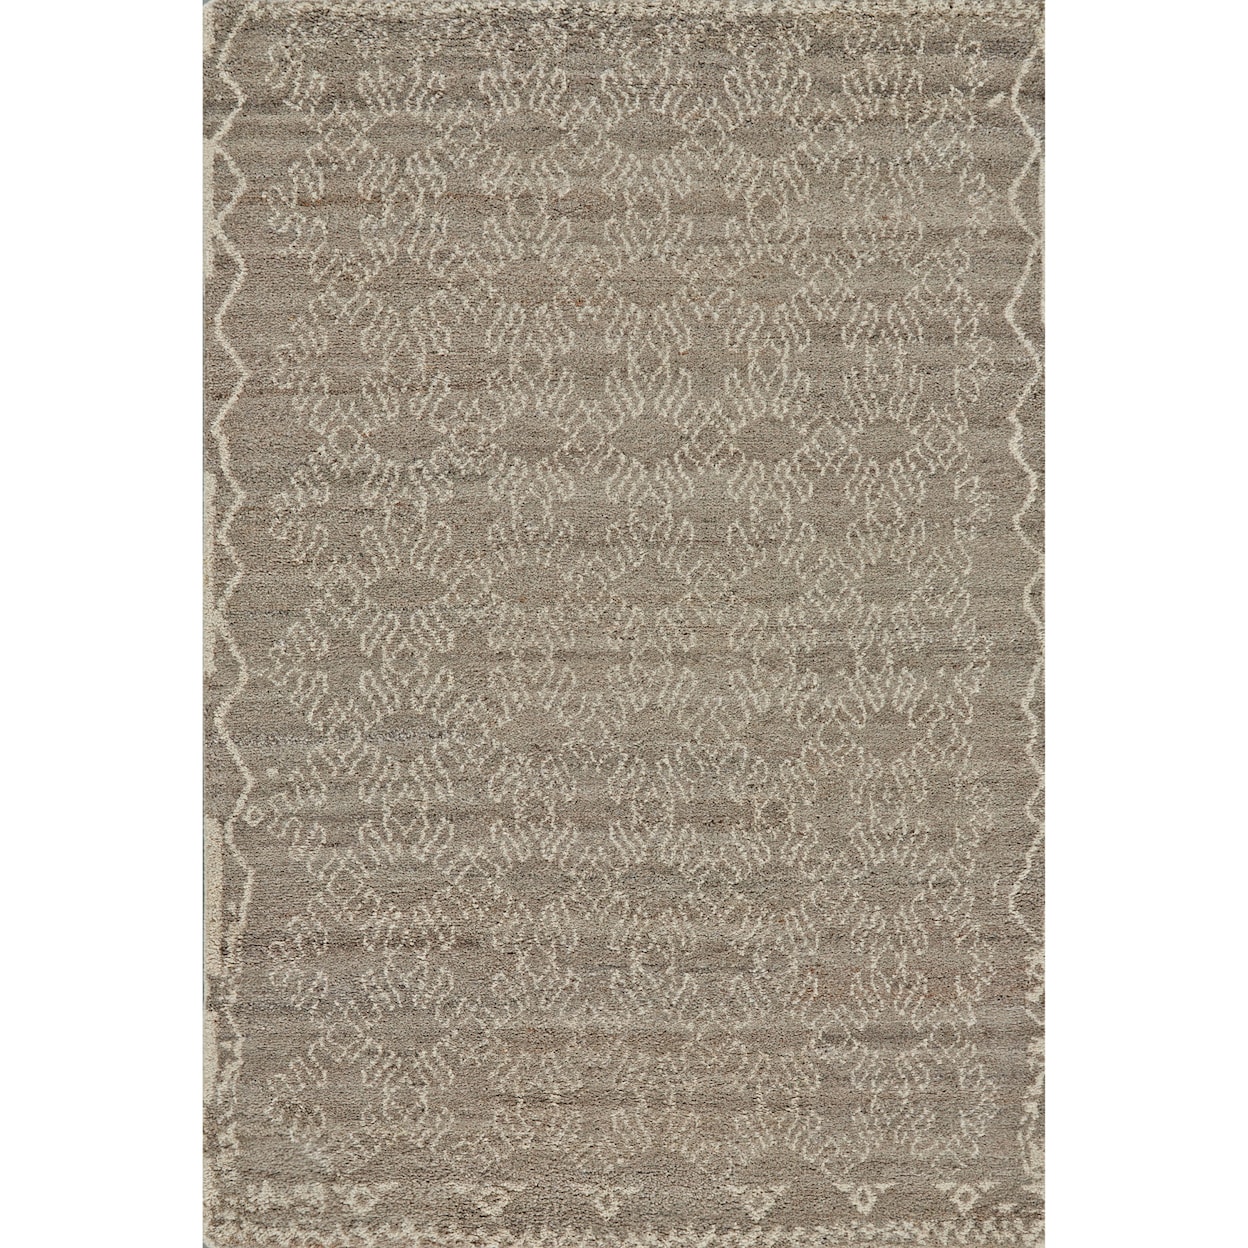 Feizy Rugs Barbary Natural/Ash 2' x 3' Area Rug